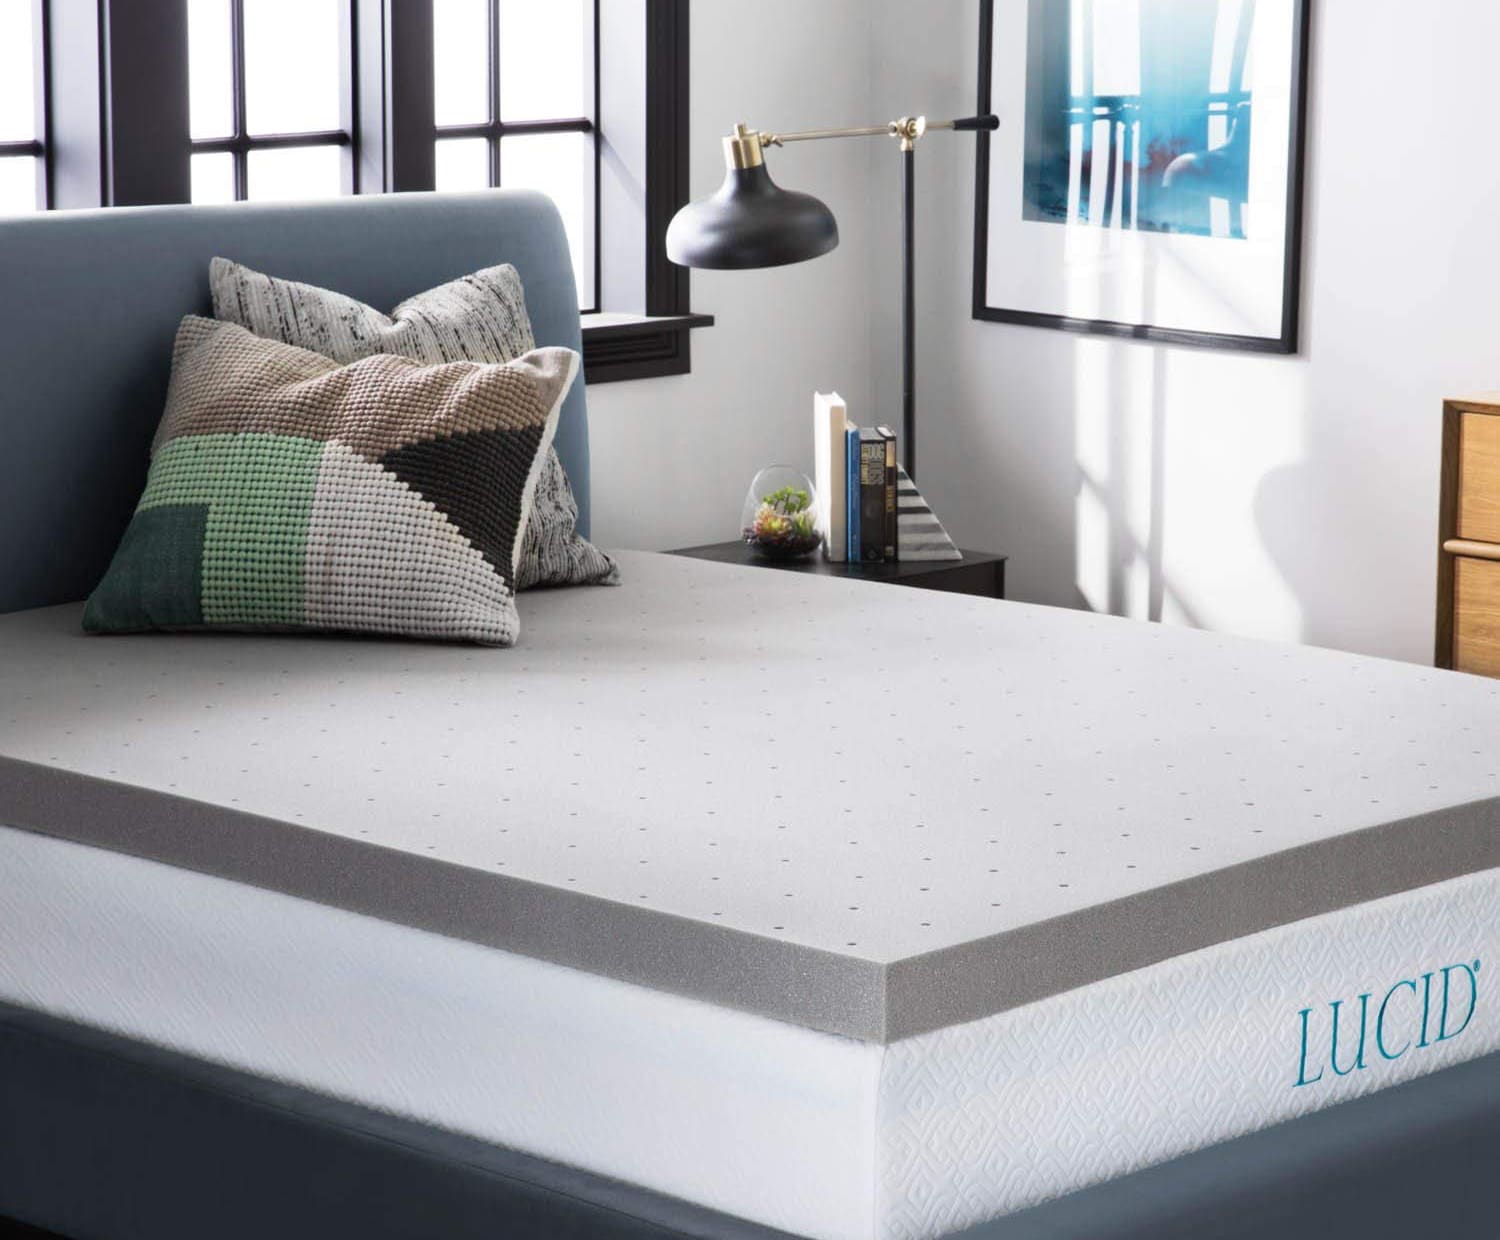 What is the Best Mattress Topper for Side Sleepers in 2020? Top 5 Picks